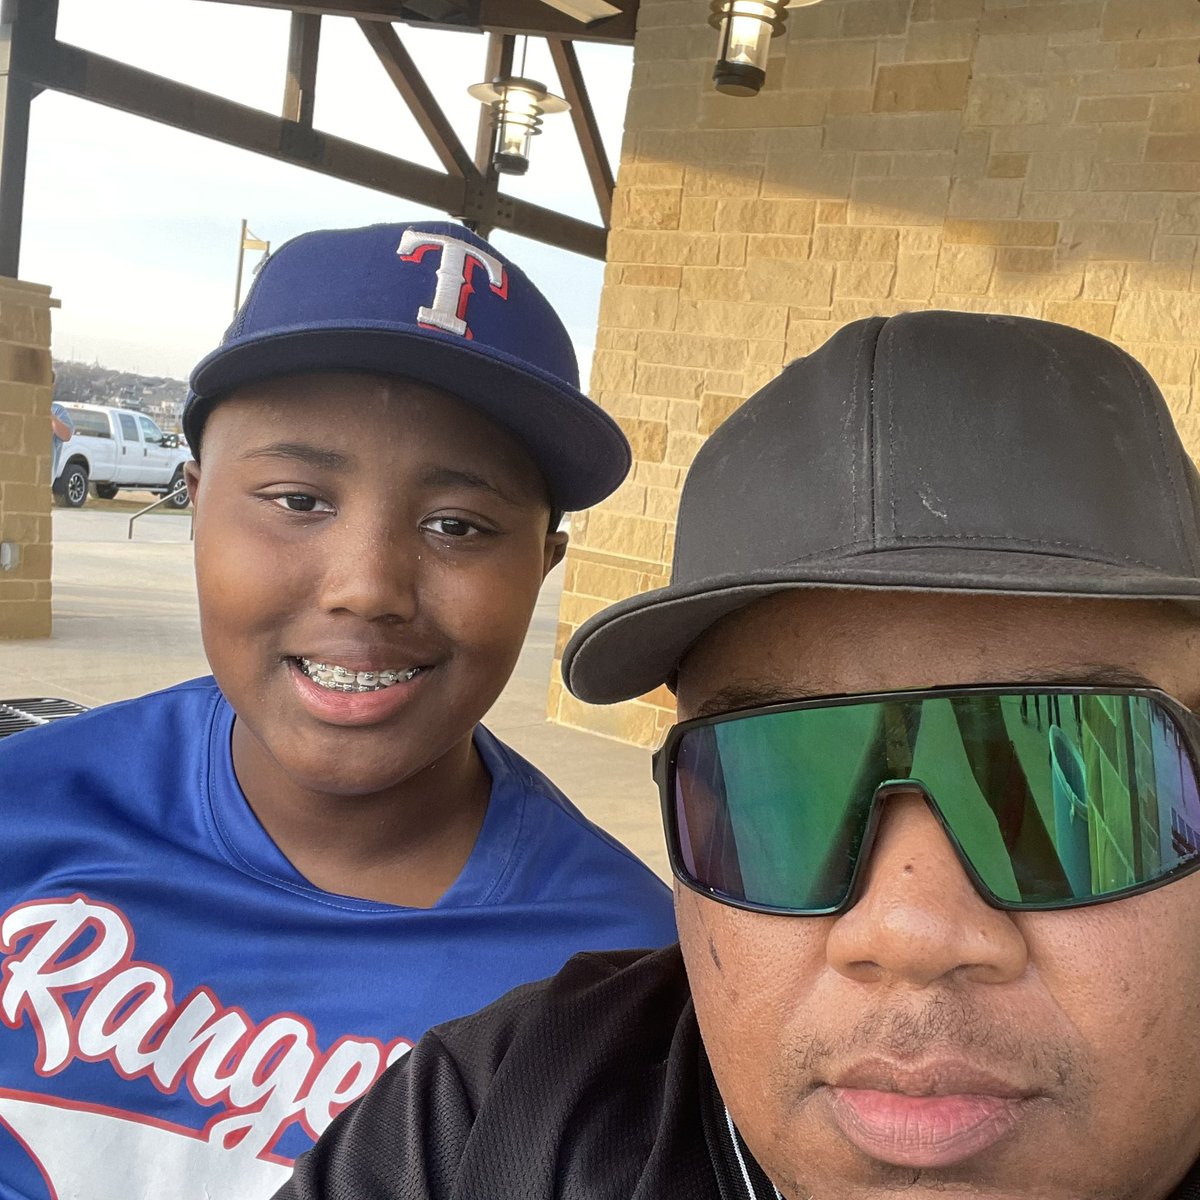 I had a visitor at the fields for my last 4 games! Reminded me of when I would go with my dad when he was umpiring games in Hachie and Midlothian. Opening day and completed 7 games from 9 am to 750 pm!